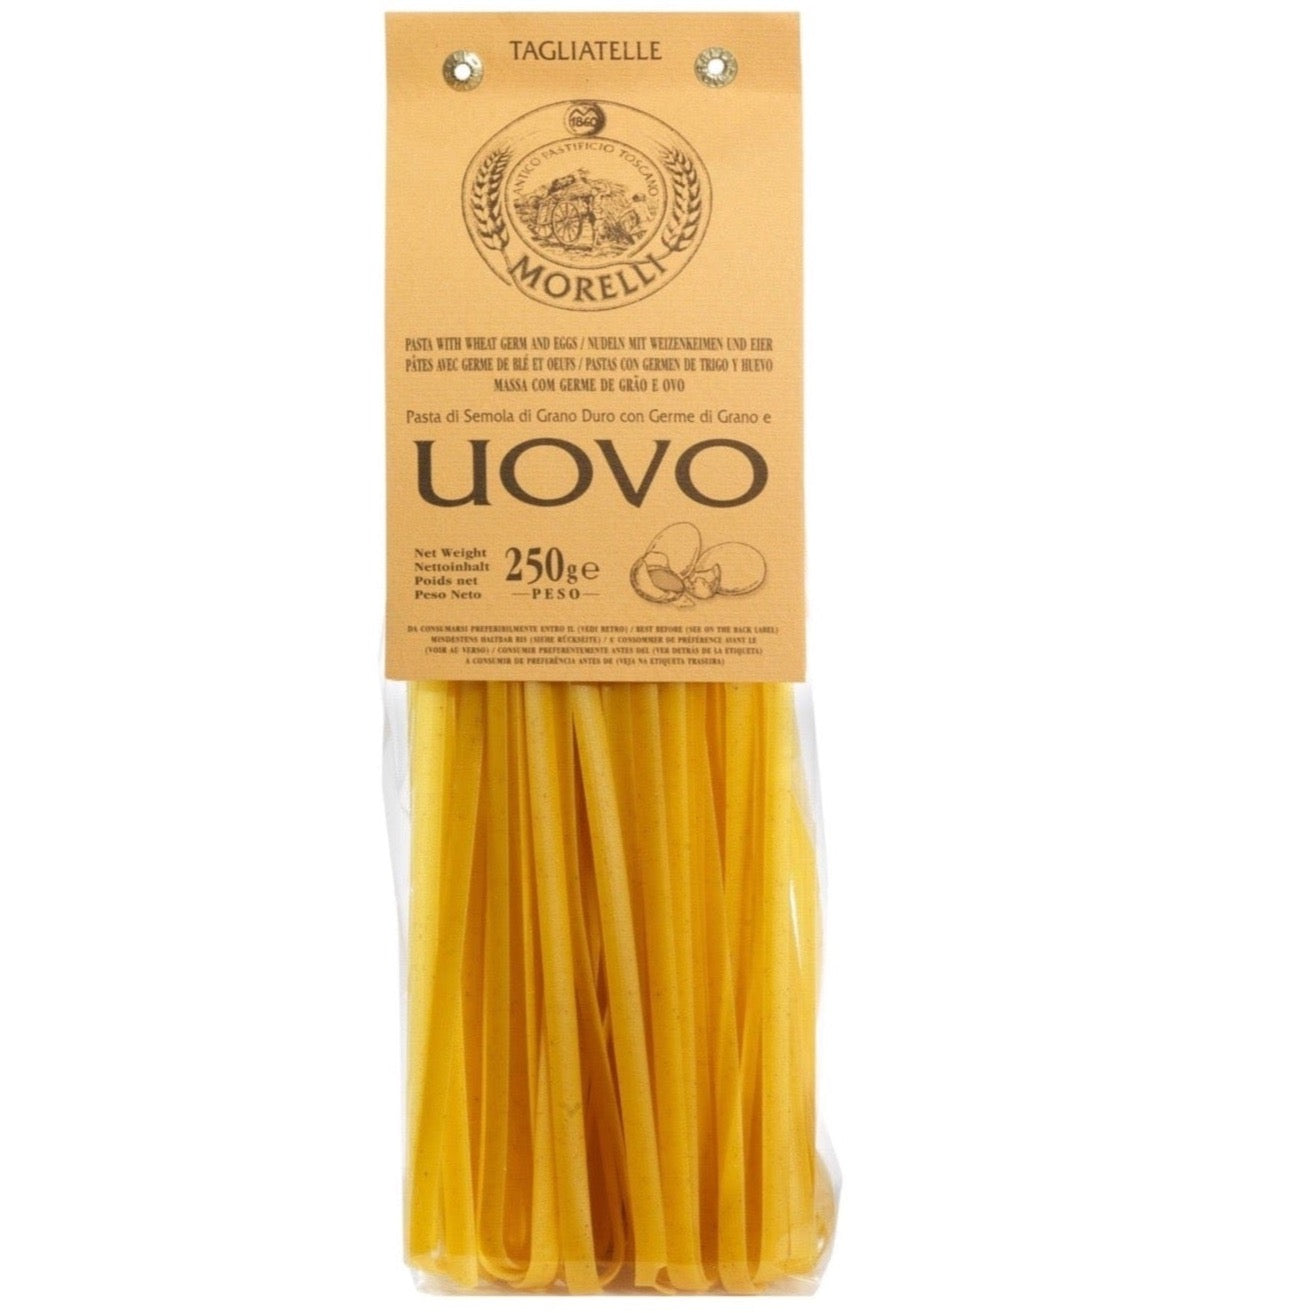 pasta in clear bag. bag has brown label at the top